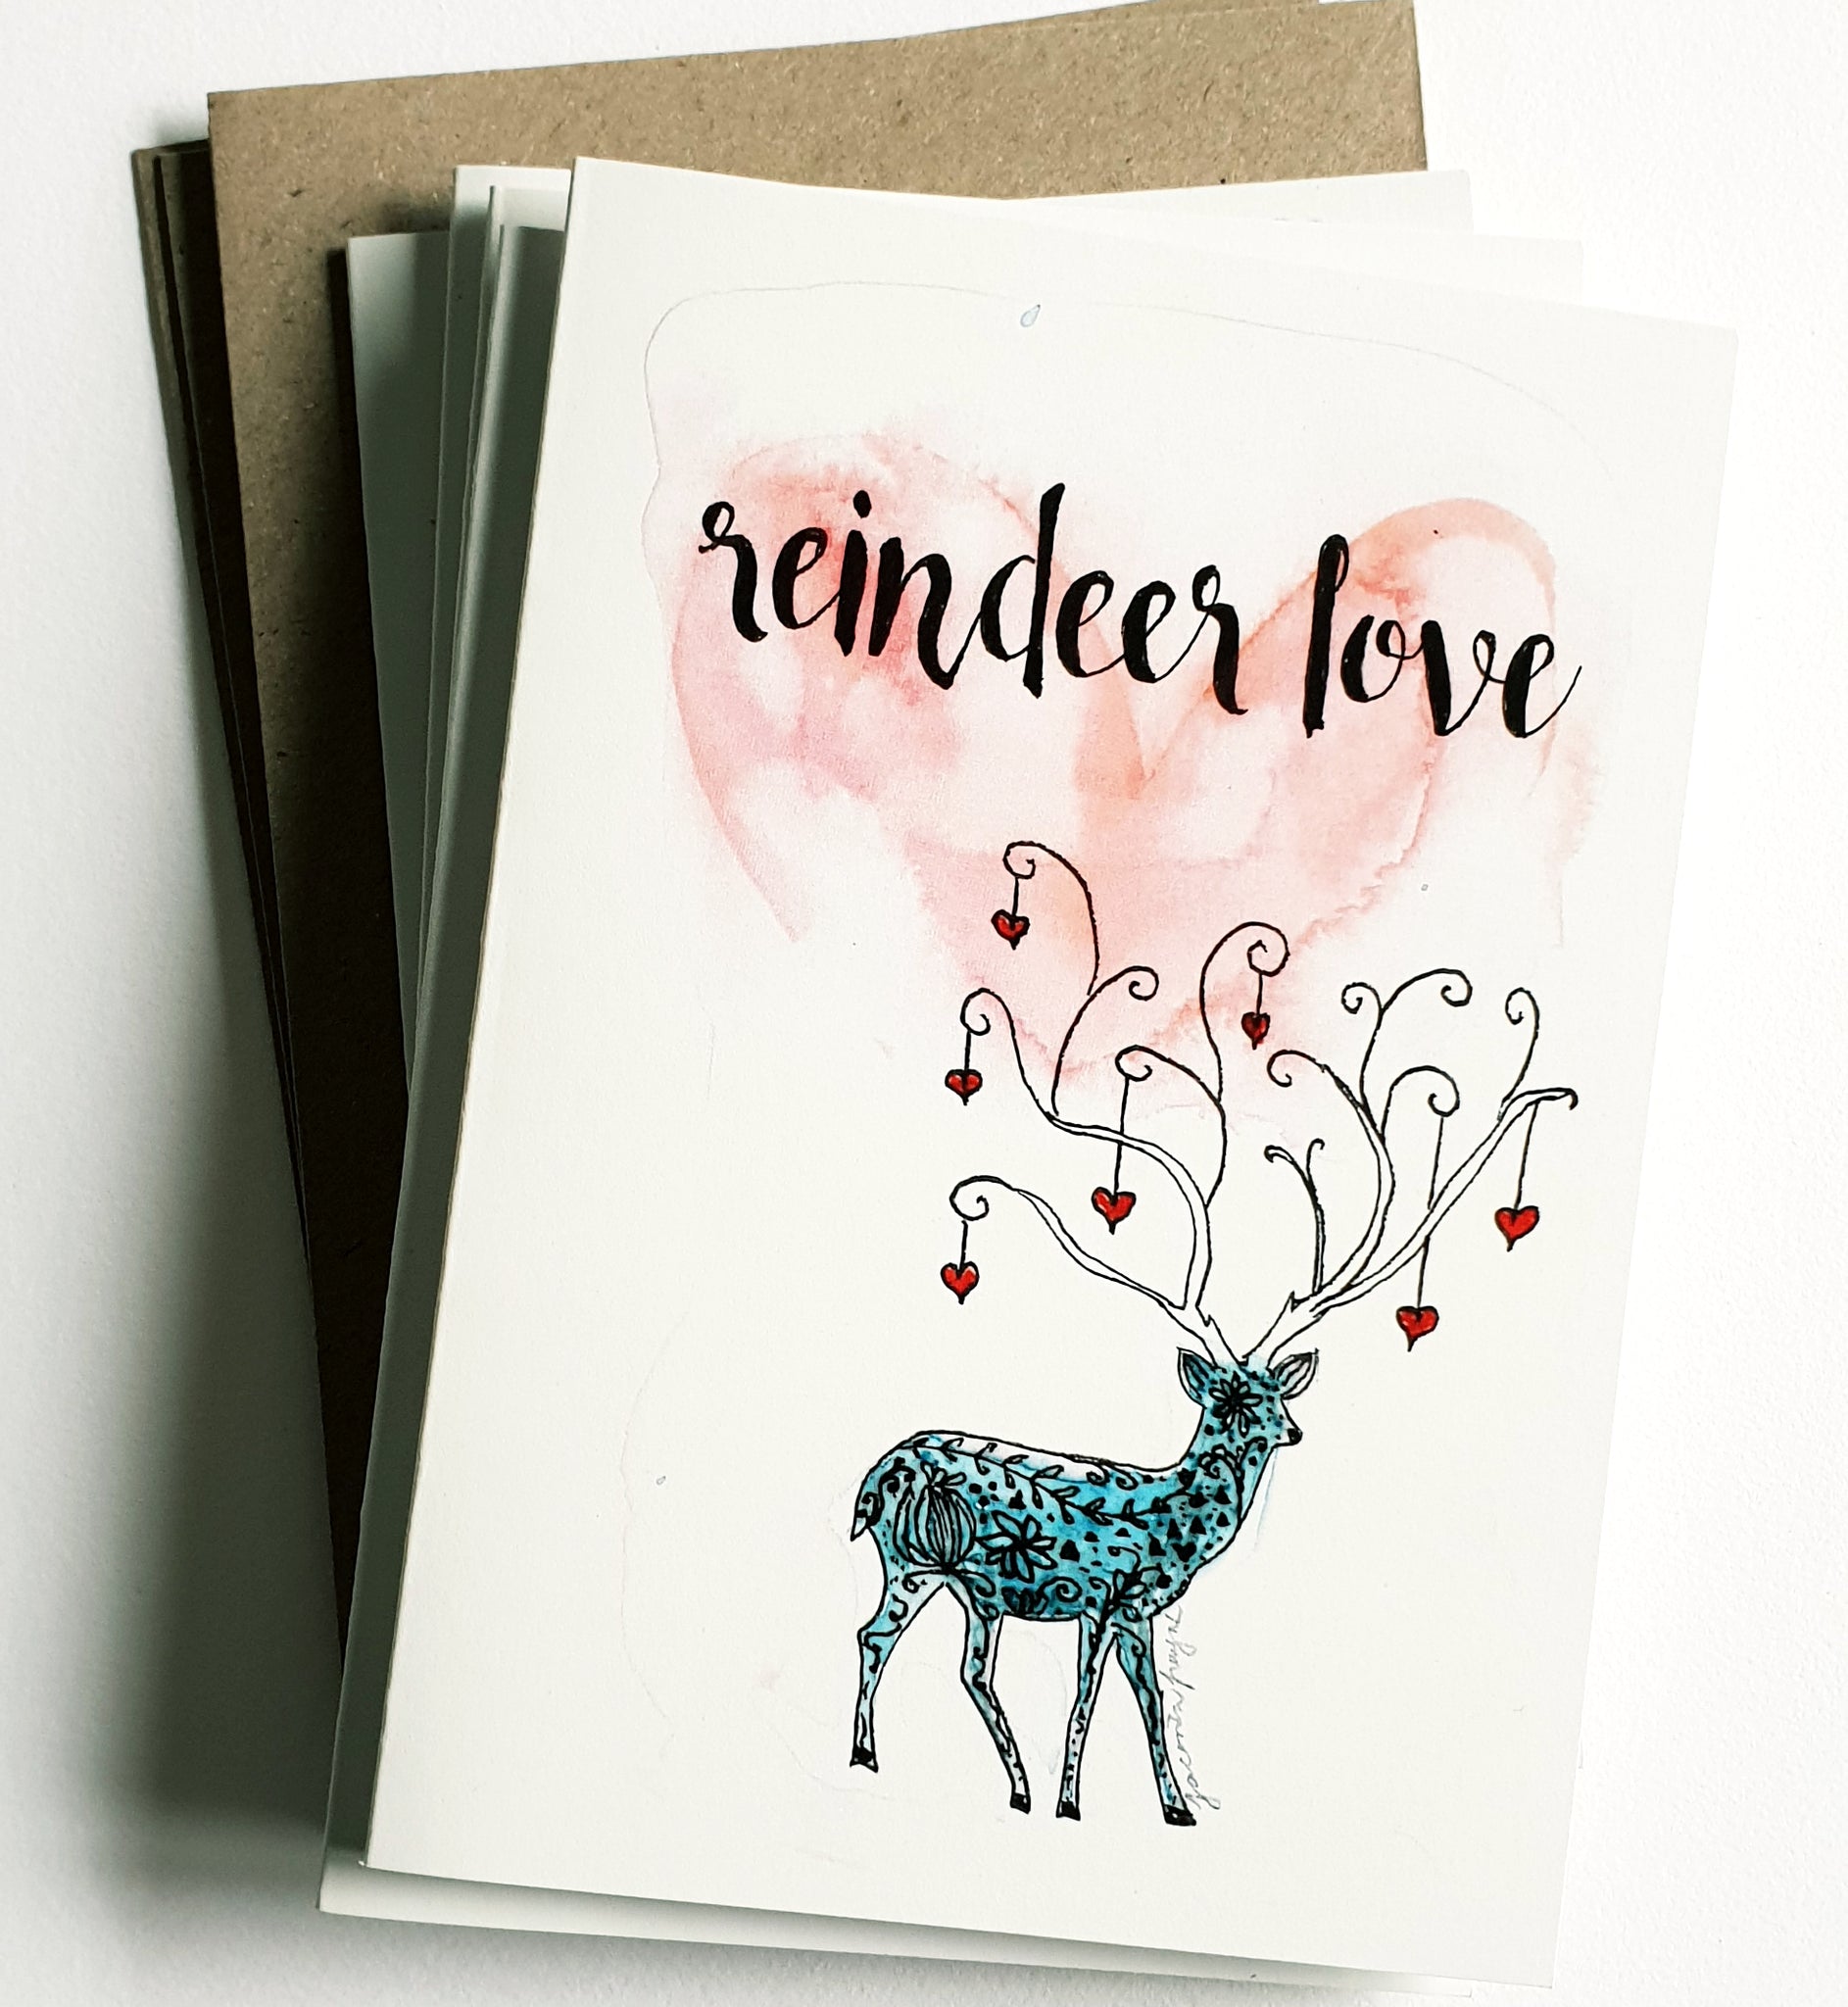 Christmas cards pack - Set of 5 "Reindeer Love" Christmas cards in A6 size including envelopes